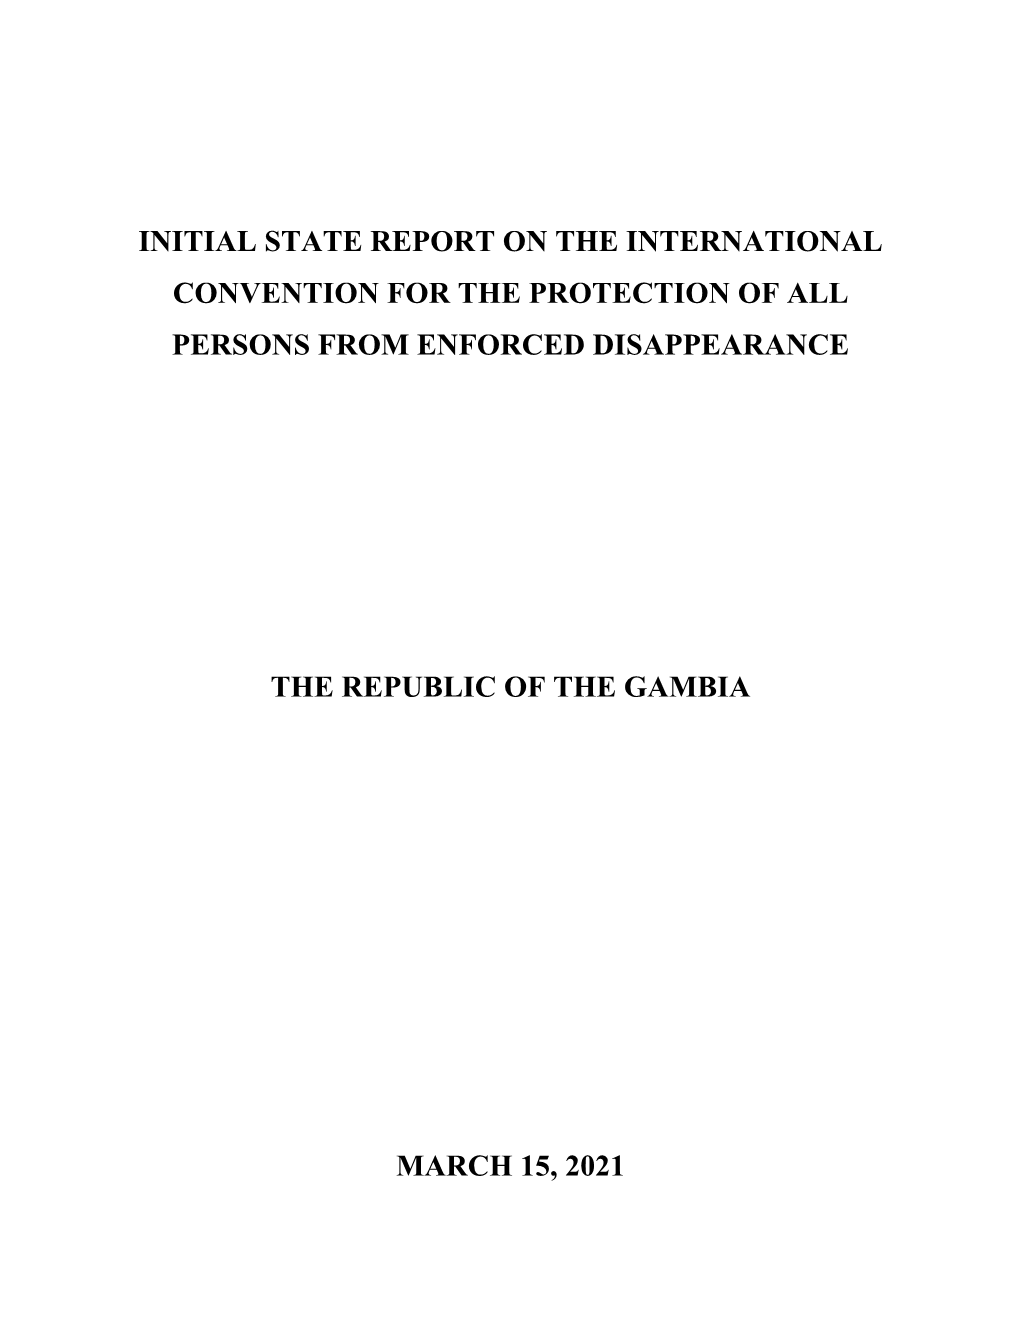 Initial State Report on the International Convention for the Protection of All Persons from Enforced Disappearance